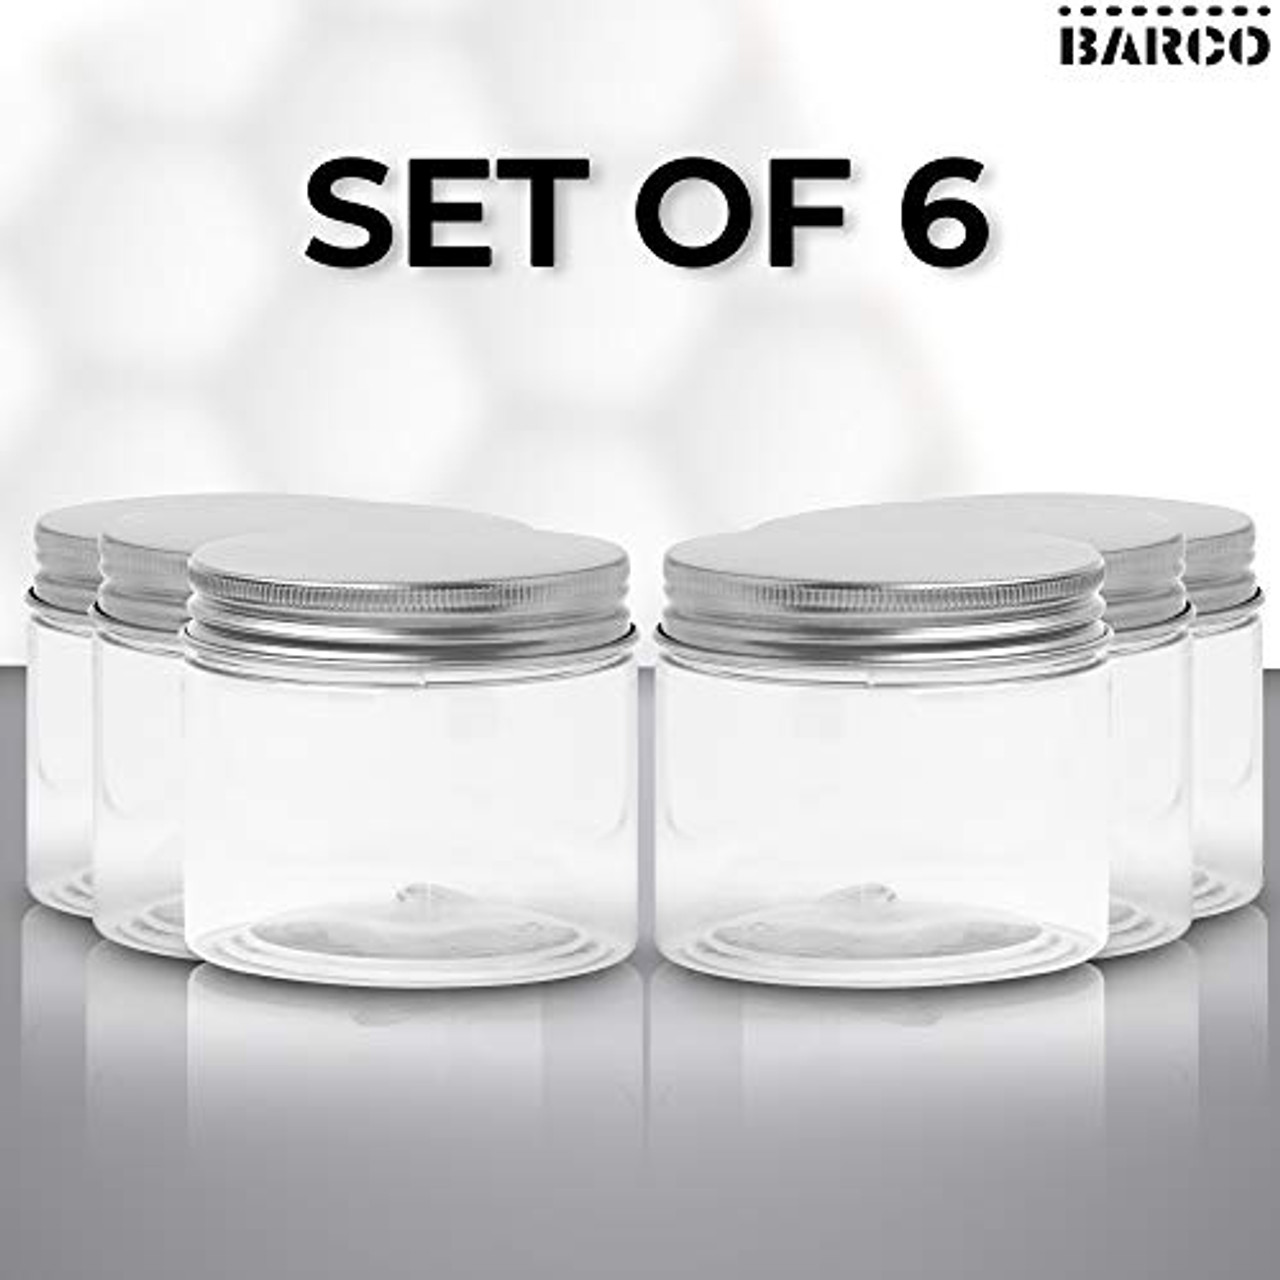 Plastic Jars With Lids, Jar With Lids, Plastic Mason Jar, Storage Containers  For Cosmetics, Slime Storage